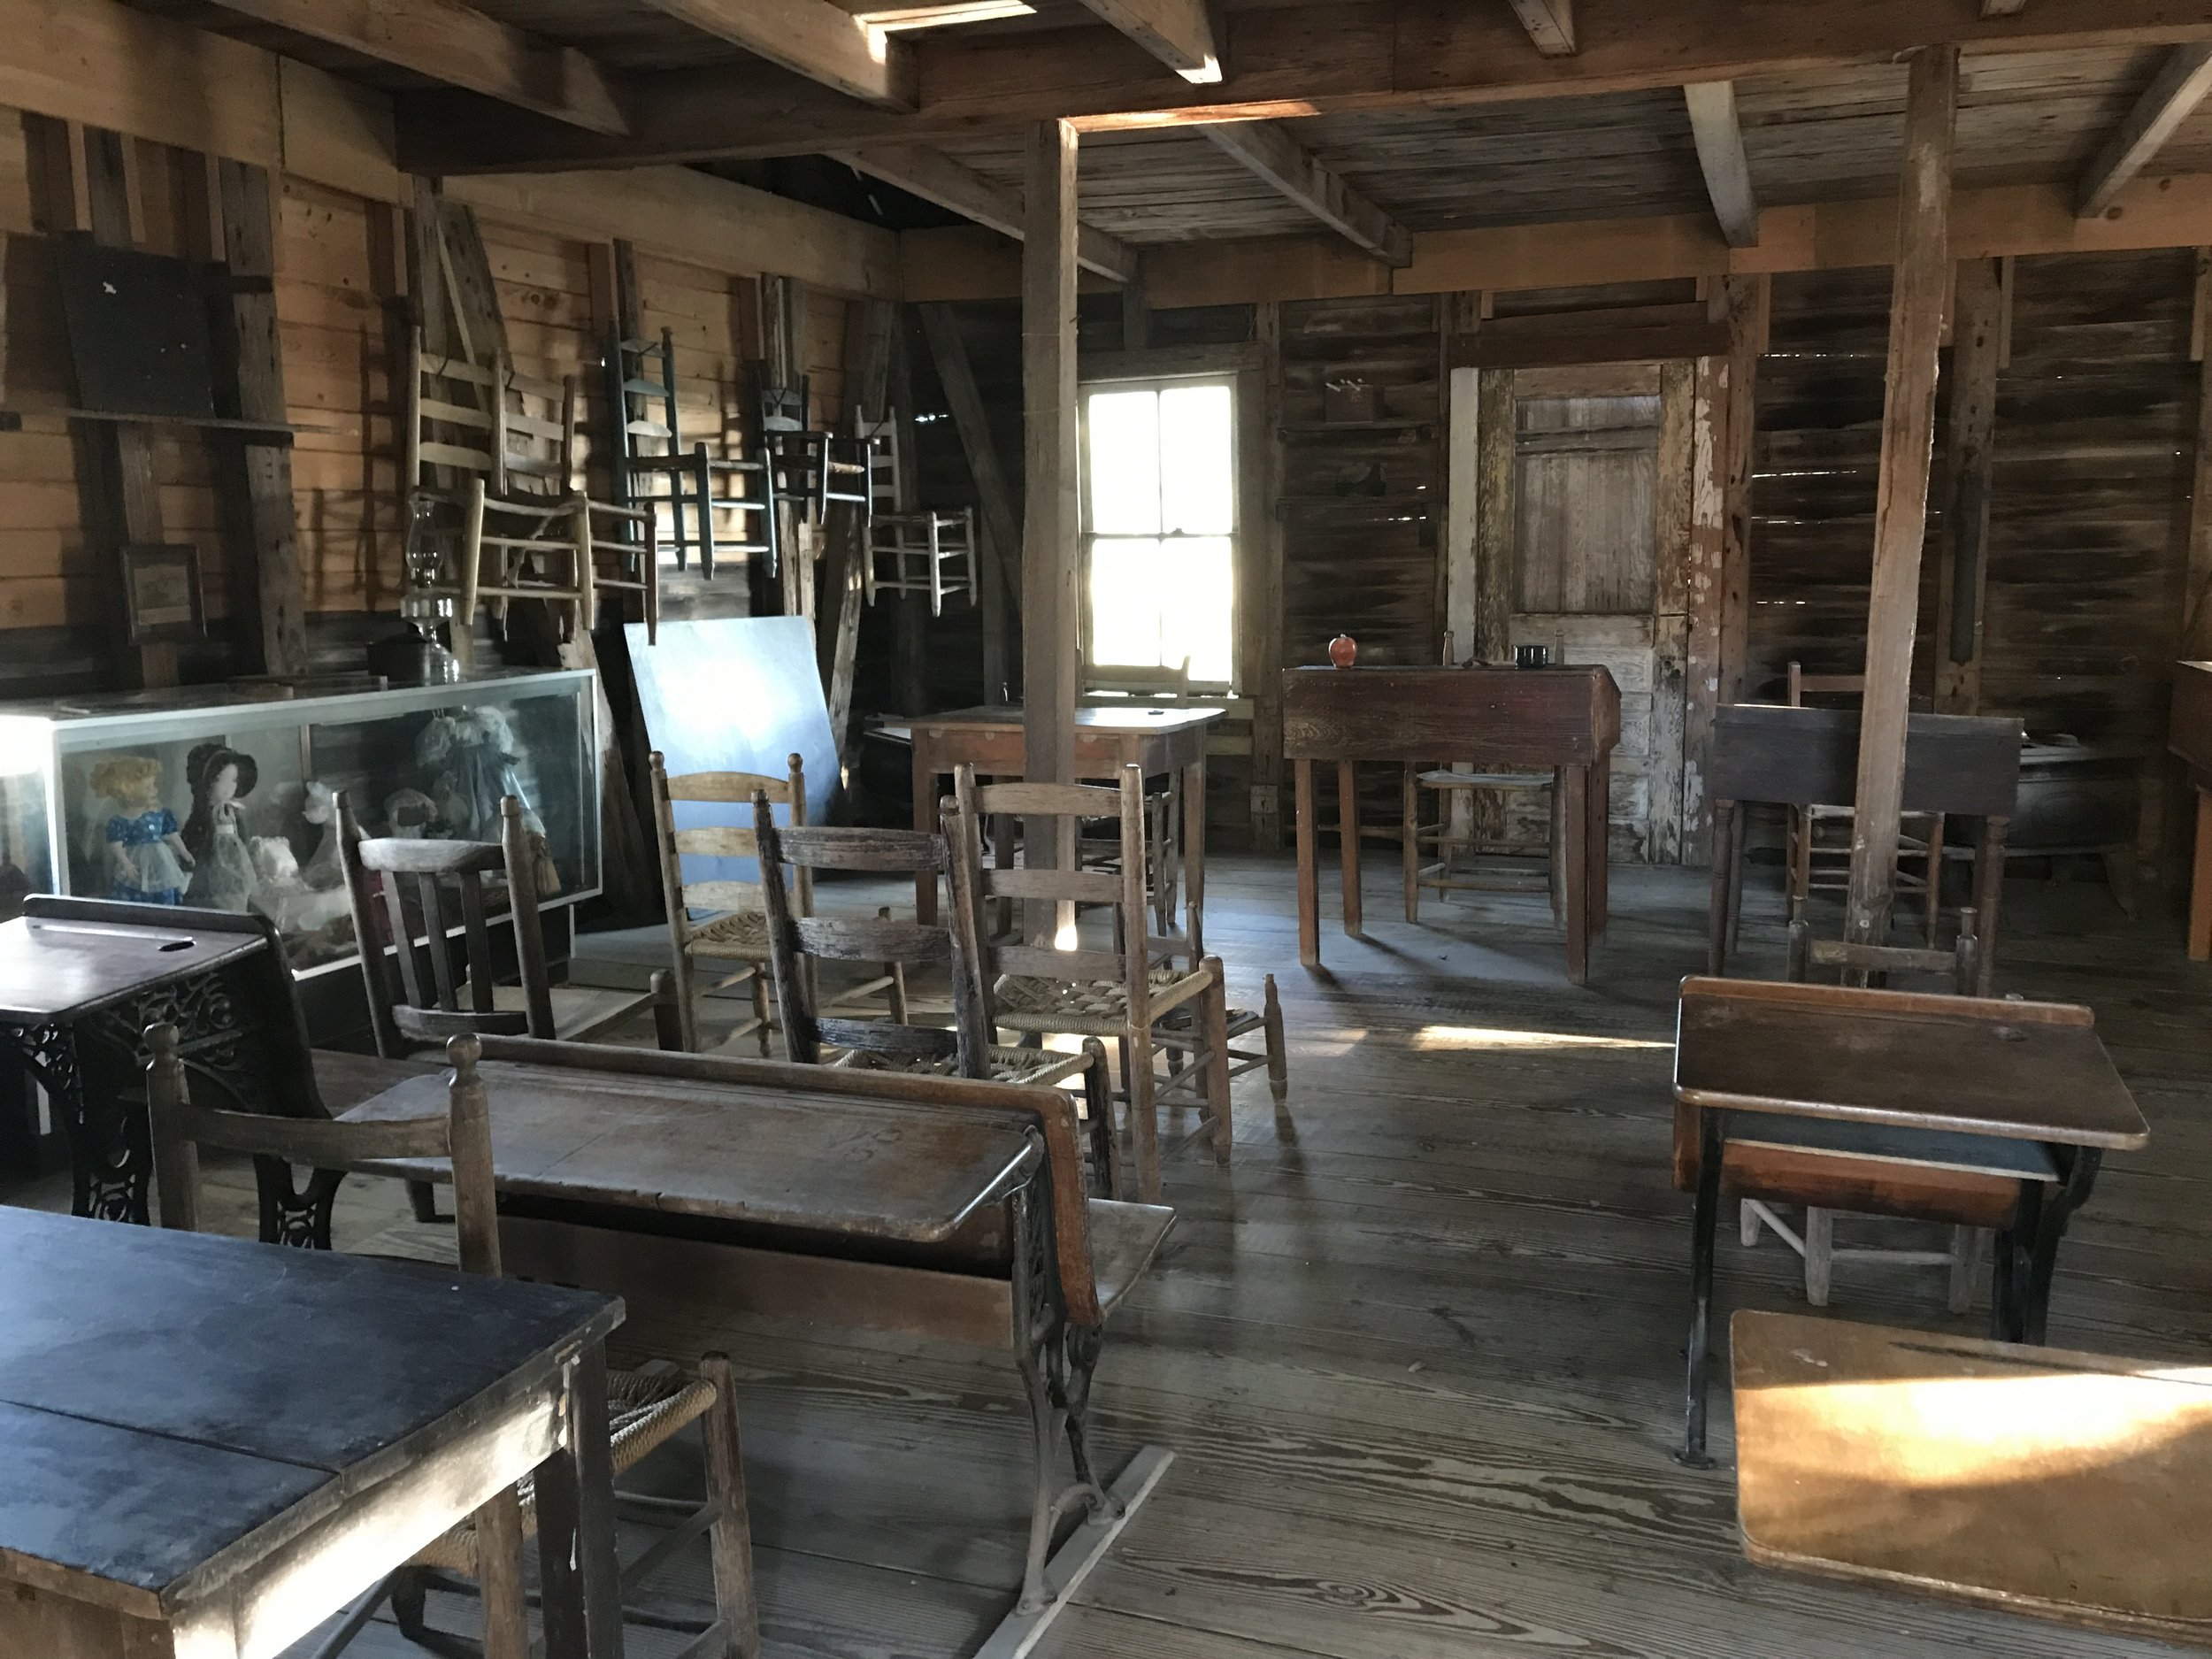 Interior of School House from 1800s from Arcadian Village in Louisiana